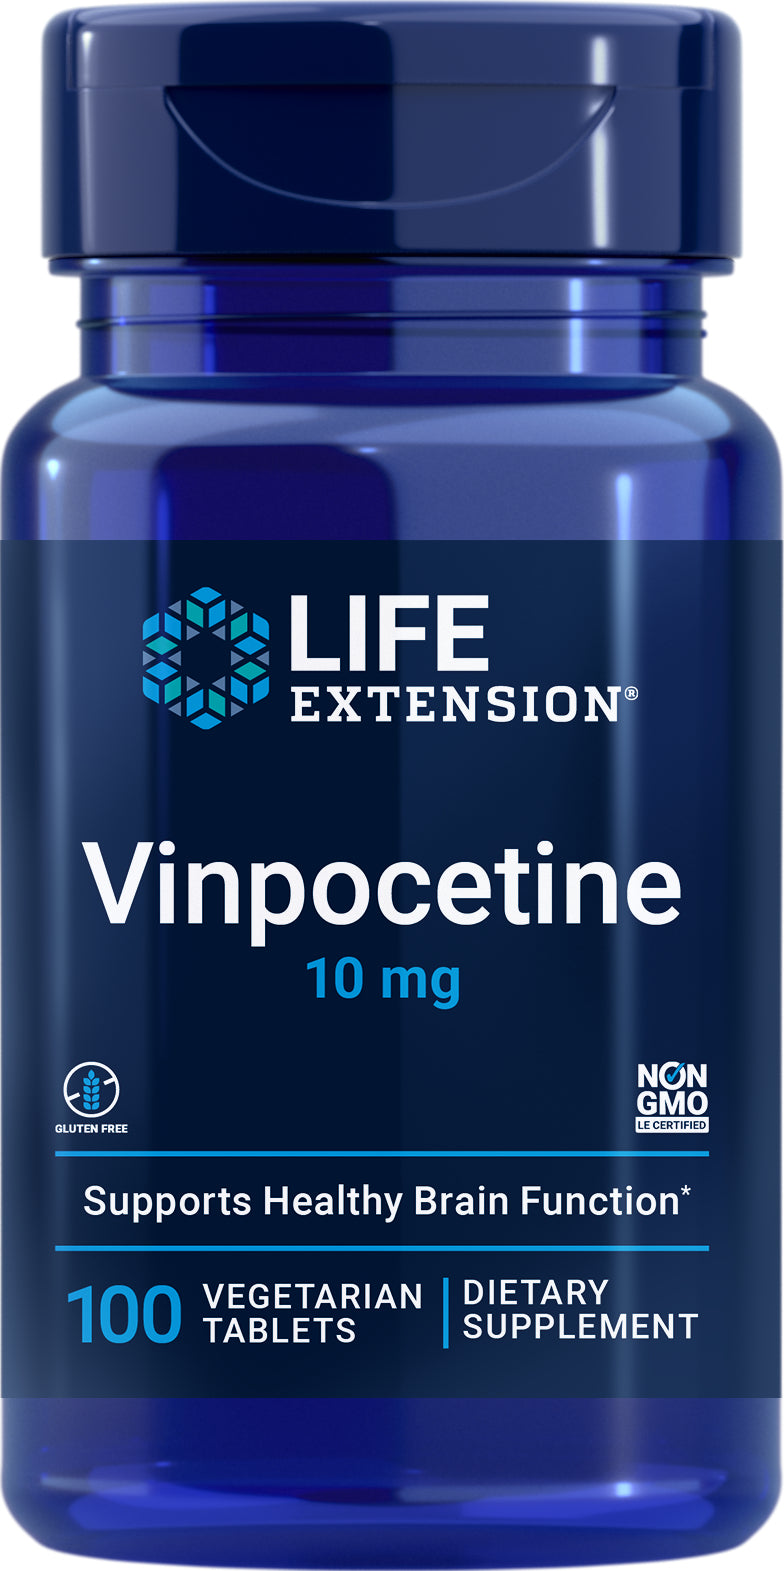 Vinpocetine 10 mg, 100 veg tabs by Life Extension